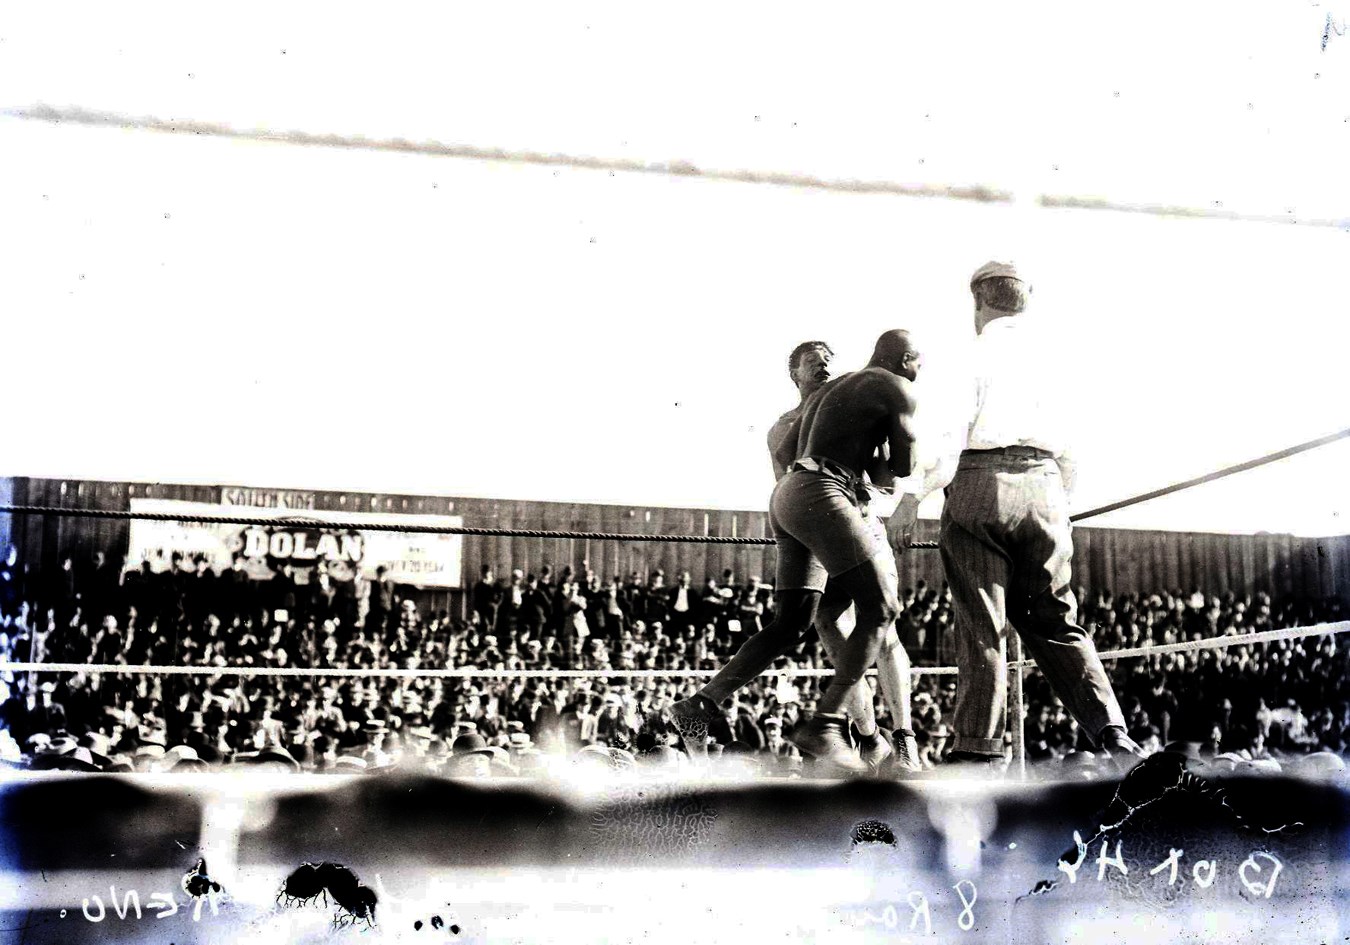 Dana Collection Of Important Boxing Negatives - 1910 Johnson vs. Jeffries "Battling in the Ring" Type I Glass Plate Negative by the Dana Studio